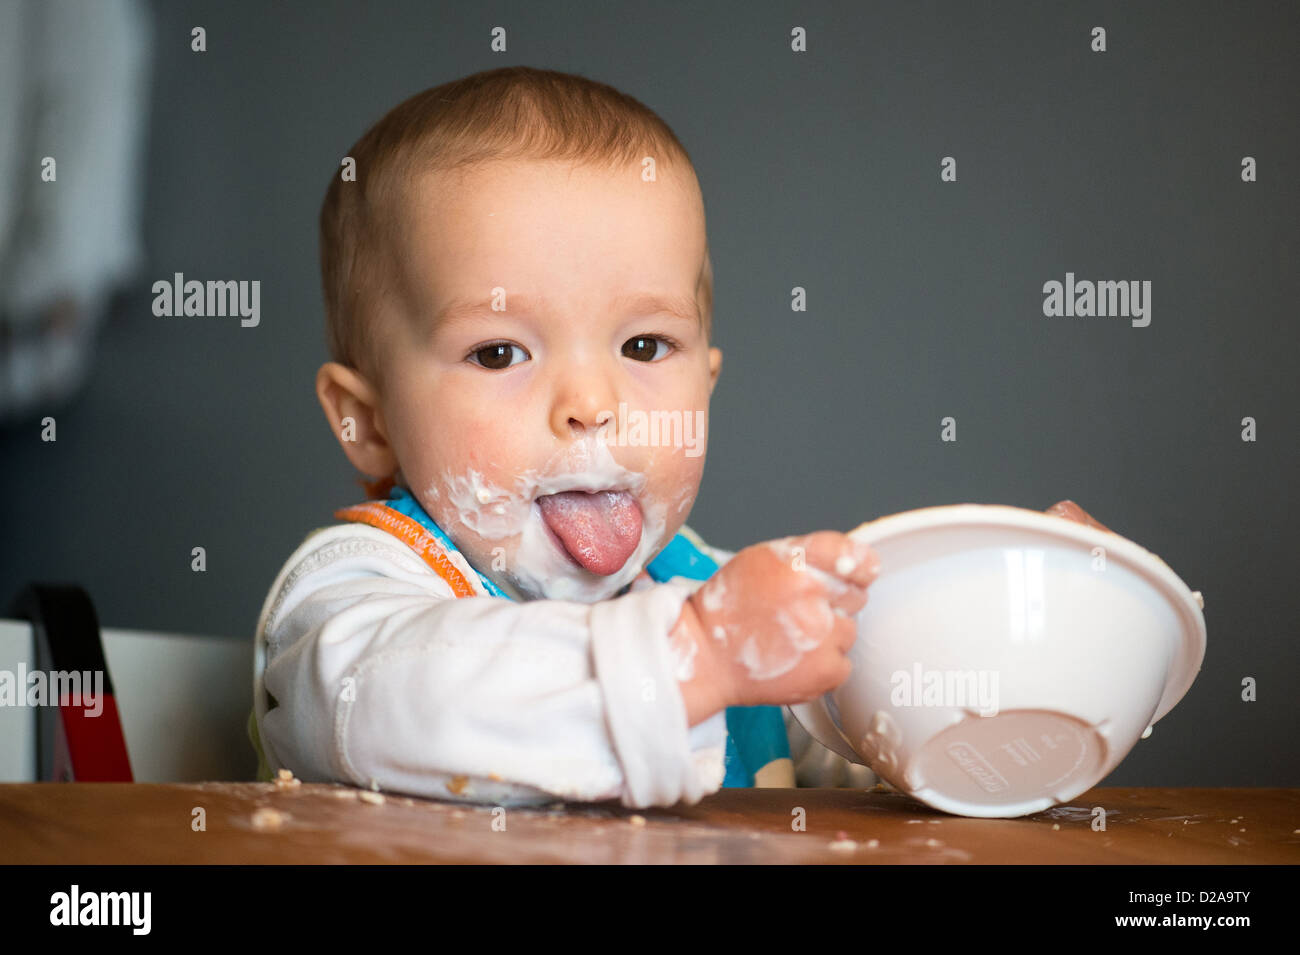 Berlin, Germany, a toddler with Schnute eating yoghurt Stock Photo